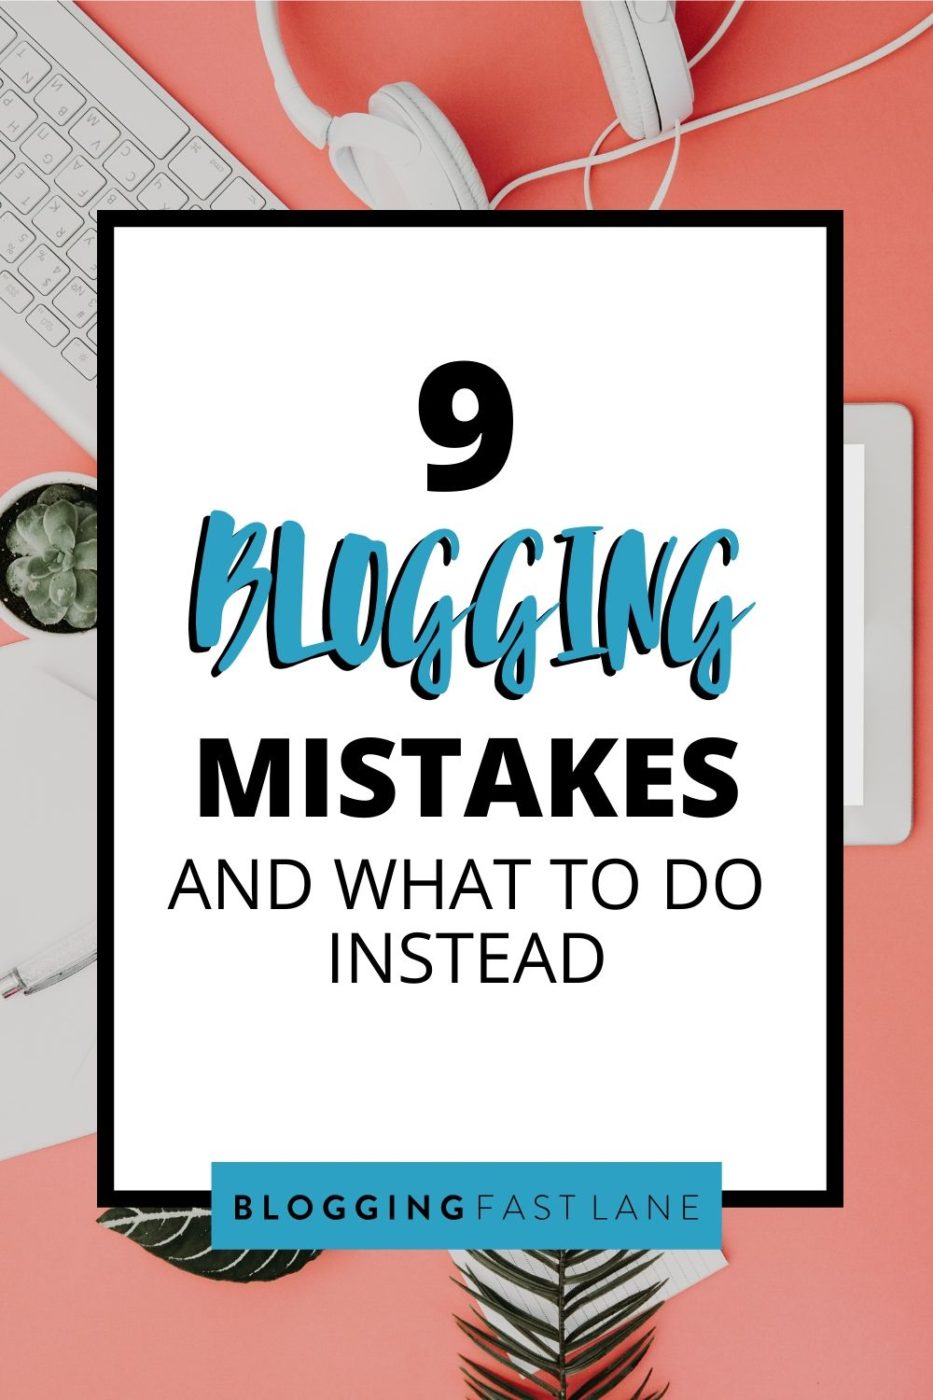 Blogging Mistakes | Want to avoid making these common blogging mistakes? Click here to read our article on the most common mistakes in blogging and how to avoid them #blogging 